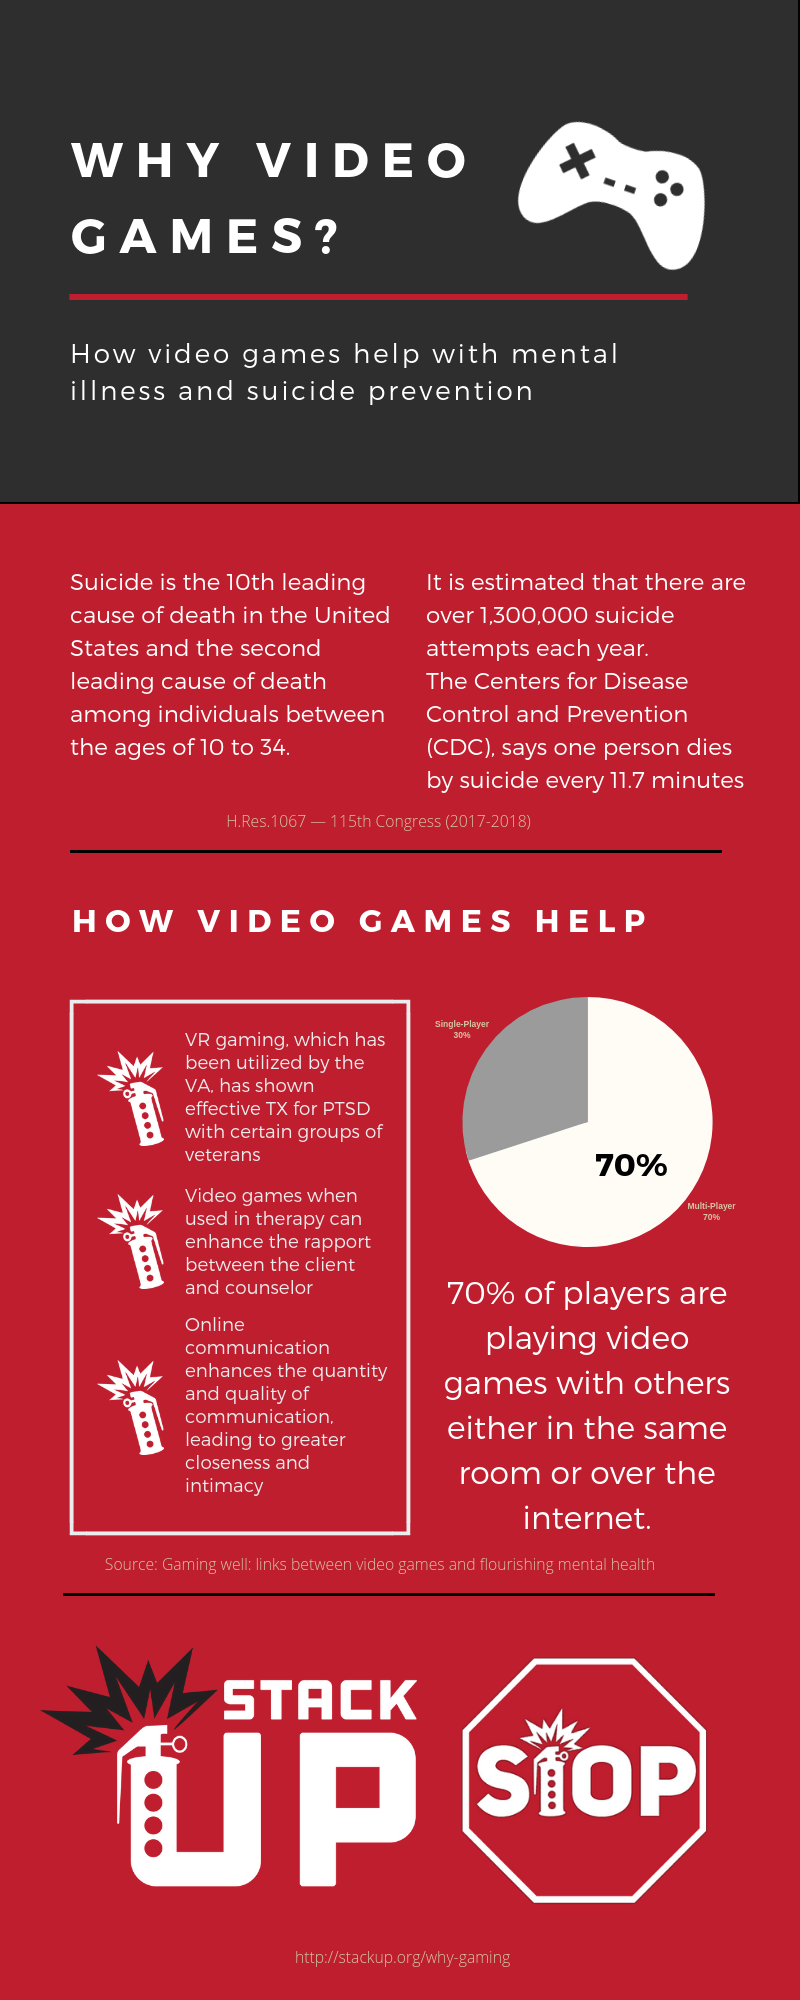 Mental Gaming Red Logo - Why Video Games? - StackUp.org